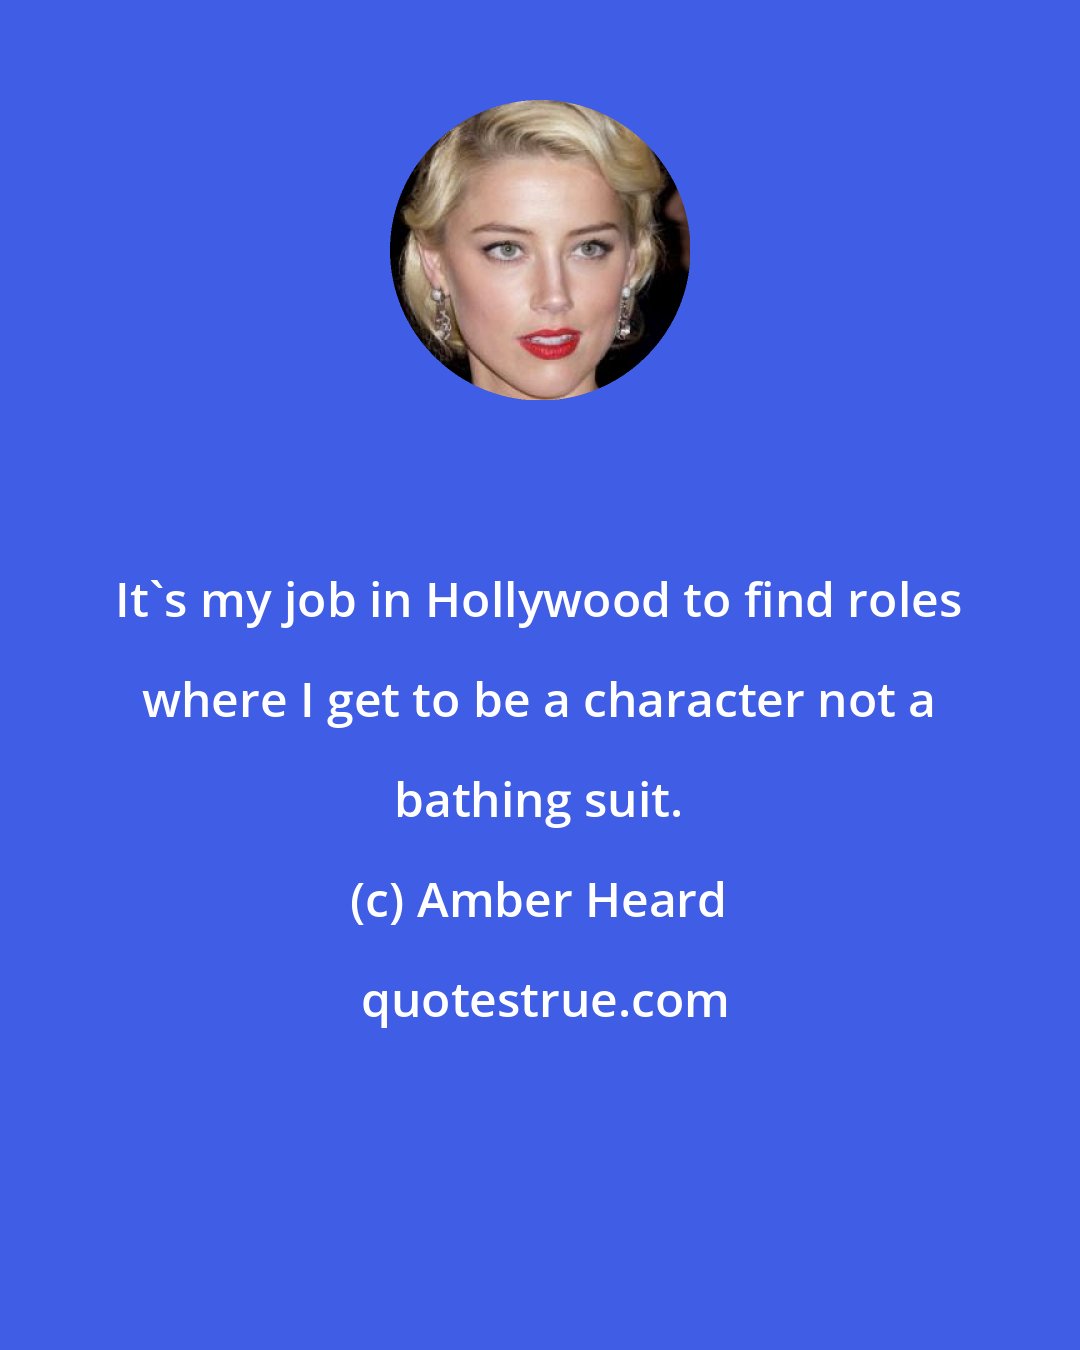 Amber Heard: It's my job in Hollywood to find roles where I get to be a character not a bathing suit.